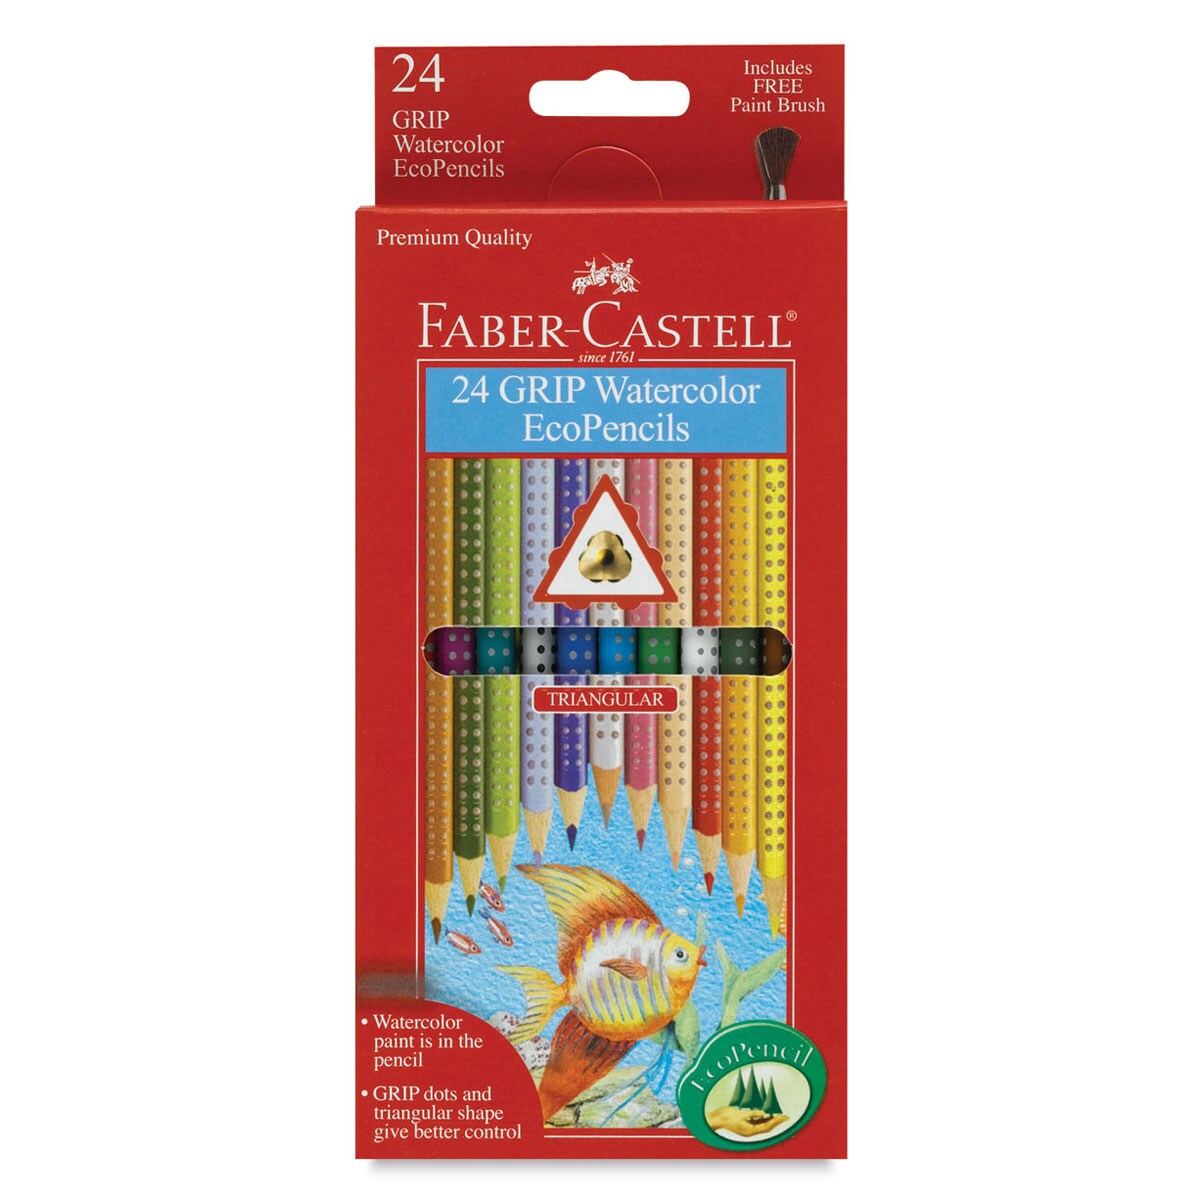 Faber-Castell Grip Watercolor EcoPencil Set - Assorted Colors, Set of 24